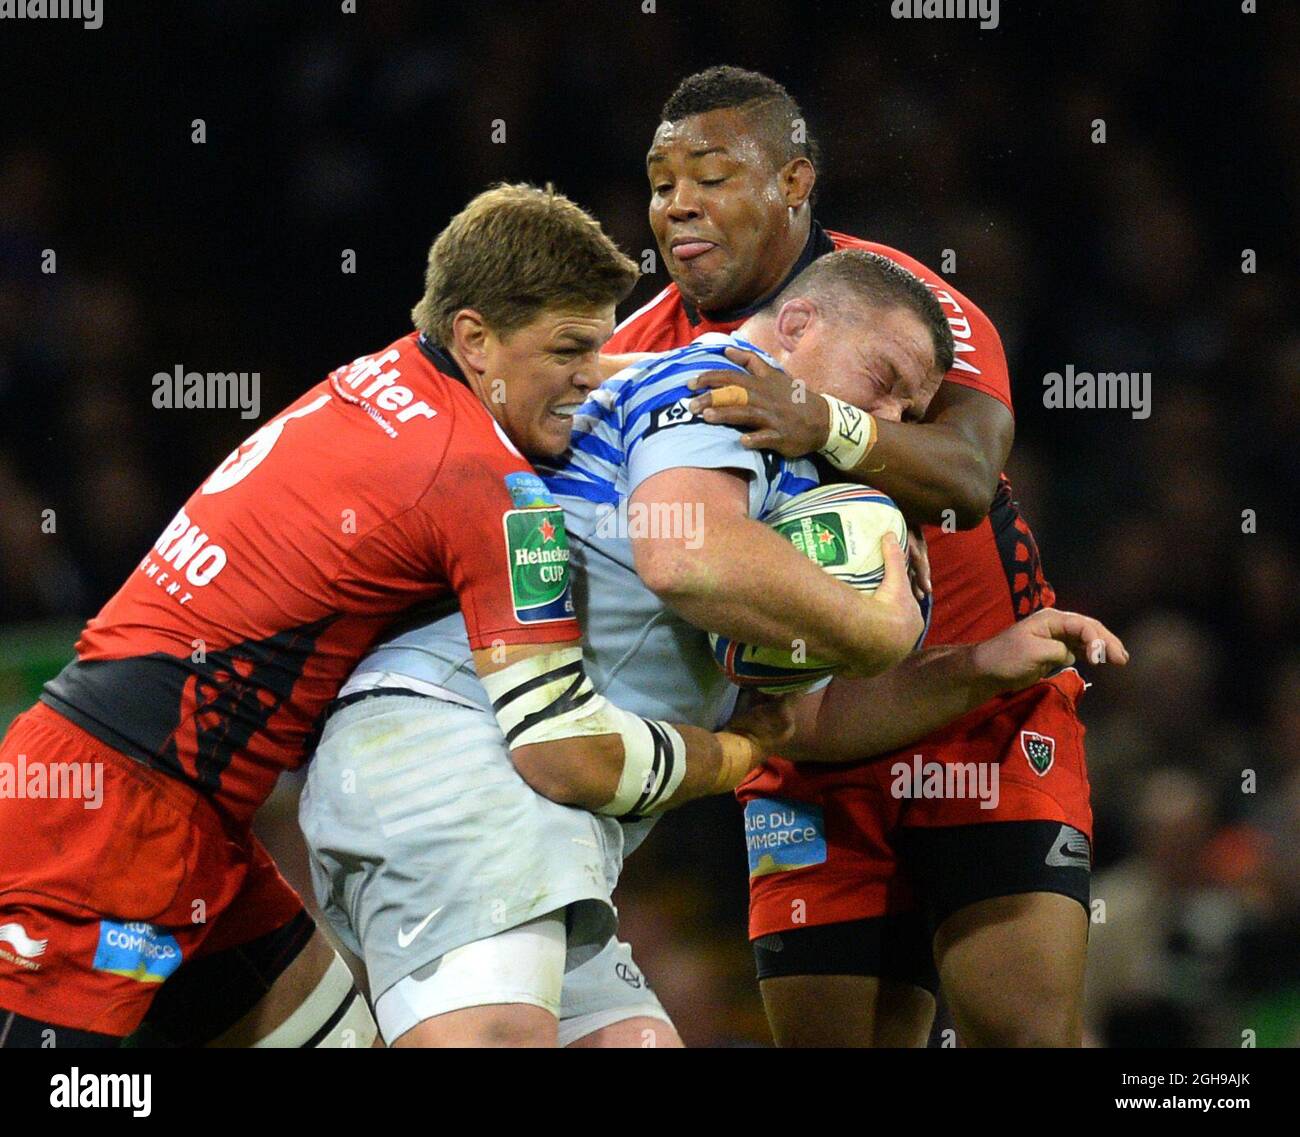 Juan Smith of RC Toulon and Steffon Armitage of RC Toulon wrap up Matt Stevens of Saracens during the Heineken Cup Final the match between RC Toulon and Saracens at the Millennium Stadium on May 24, 2014 in Cardiff, United Kingdom. Pic Simon Bellis/Sportimage. Stock Photo